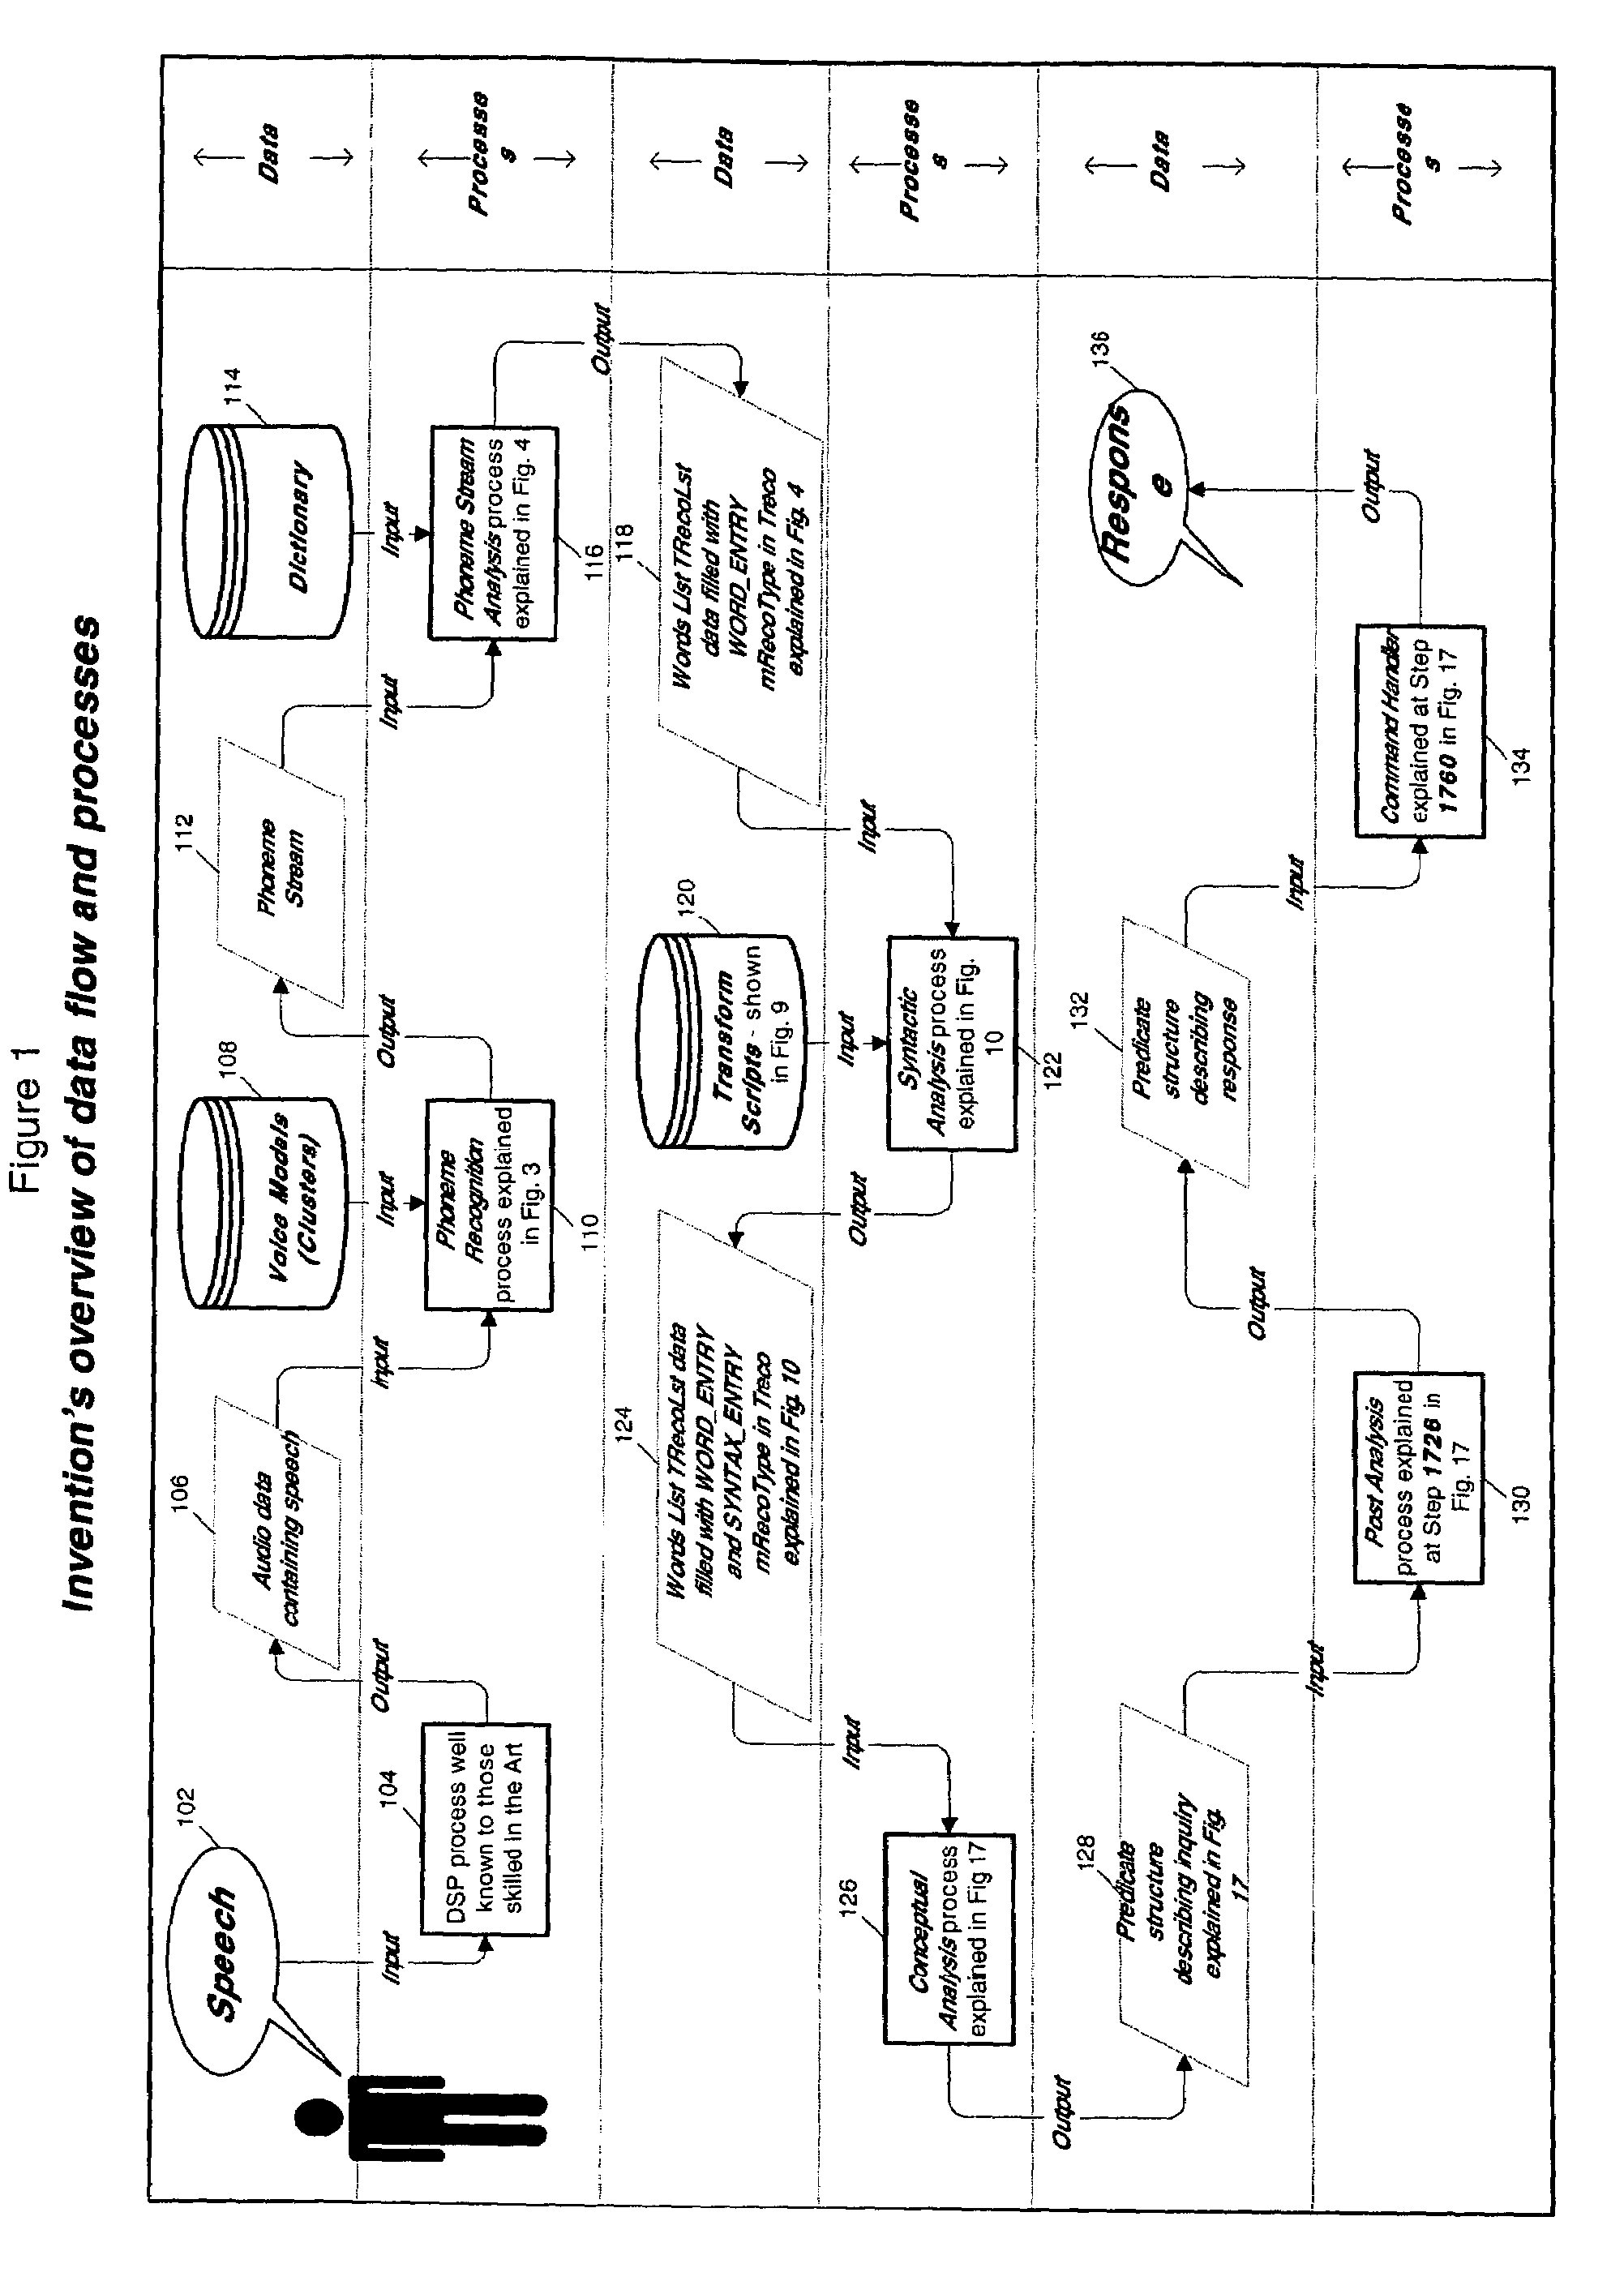 Multi-phoneme streamer and knowledge representation speech recognition system and method